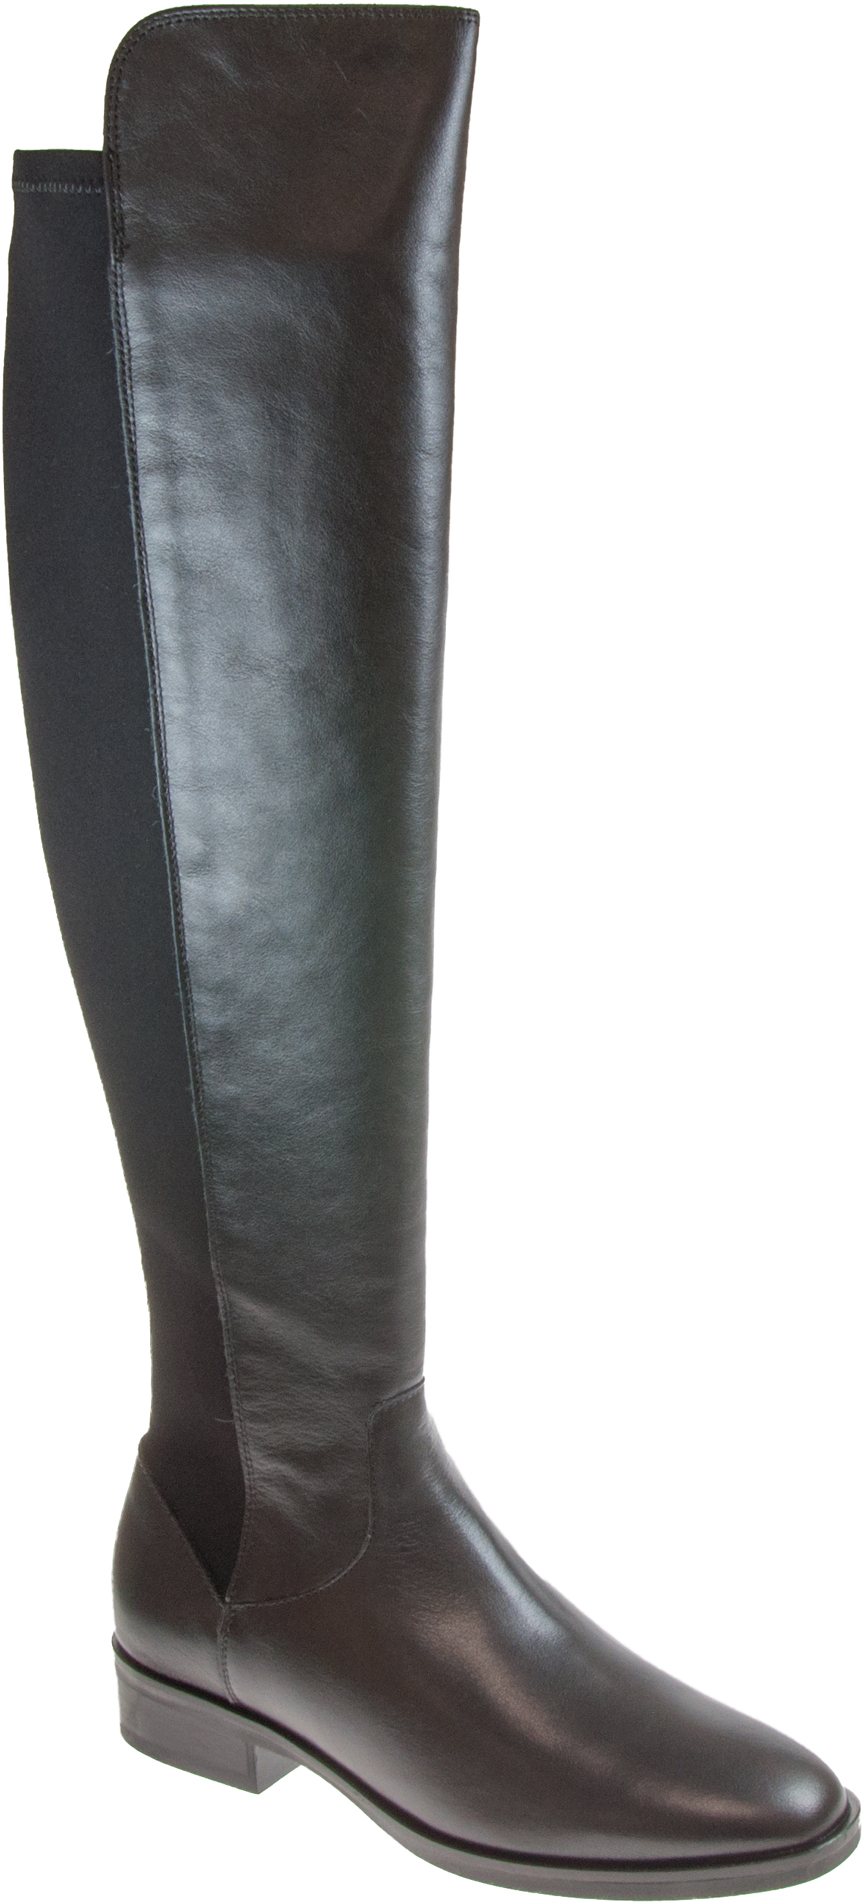 Clarks Pure Caddy Black Leather 26143536 - Over the Knee Boots ...